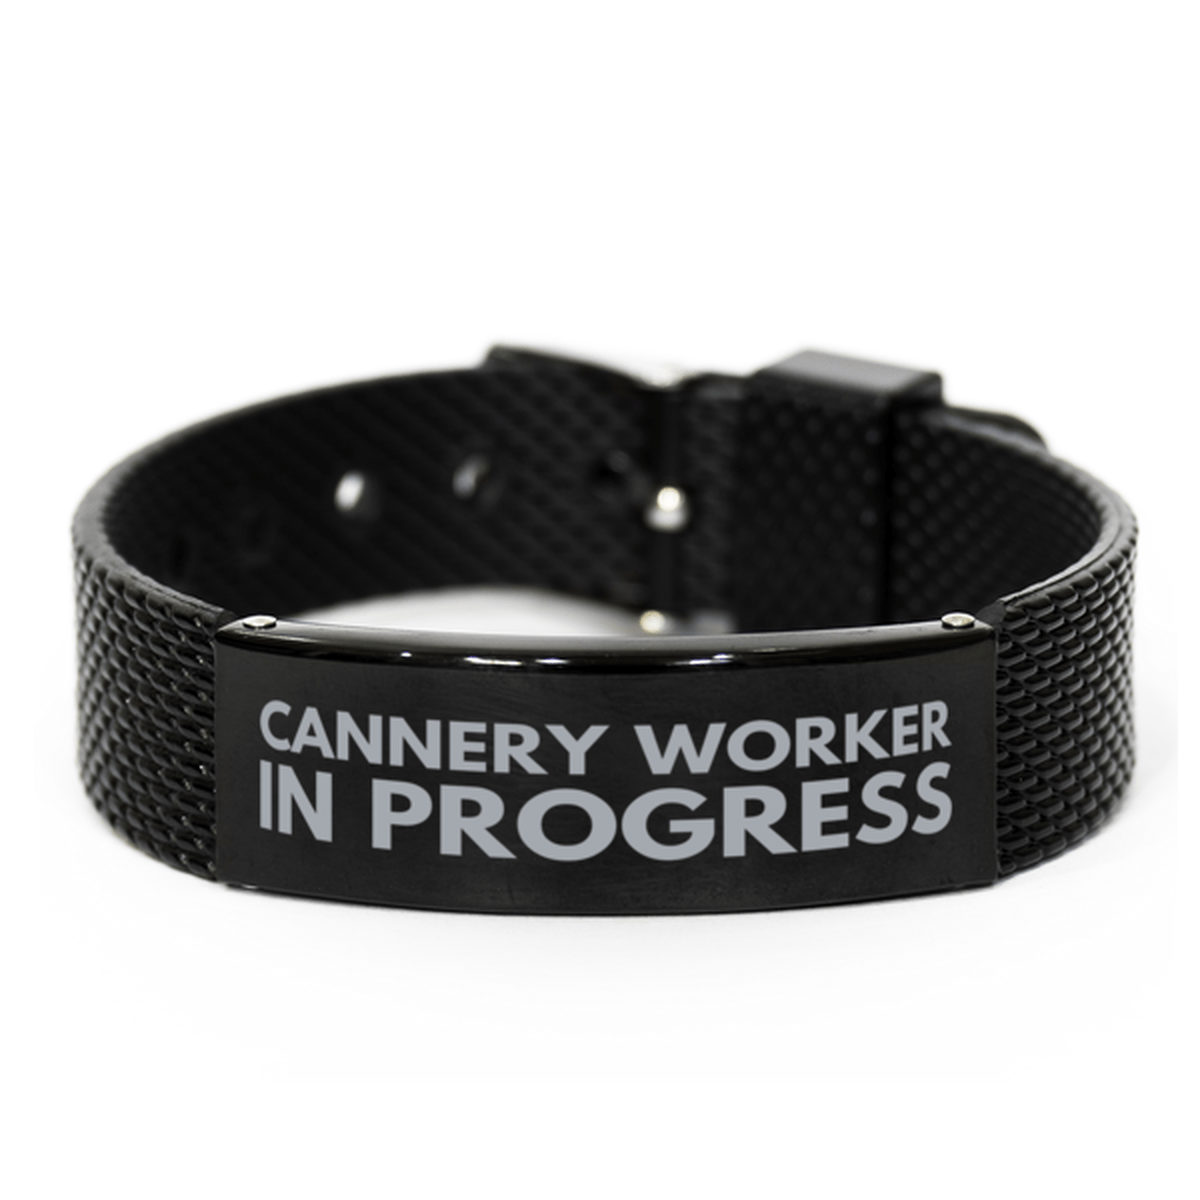 Inspirational Cannery Worker Black Shark Mesh Bracelet, Cannery Worker In Progress, Best Graduation Gifts for Students